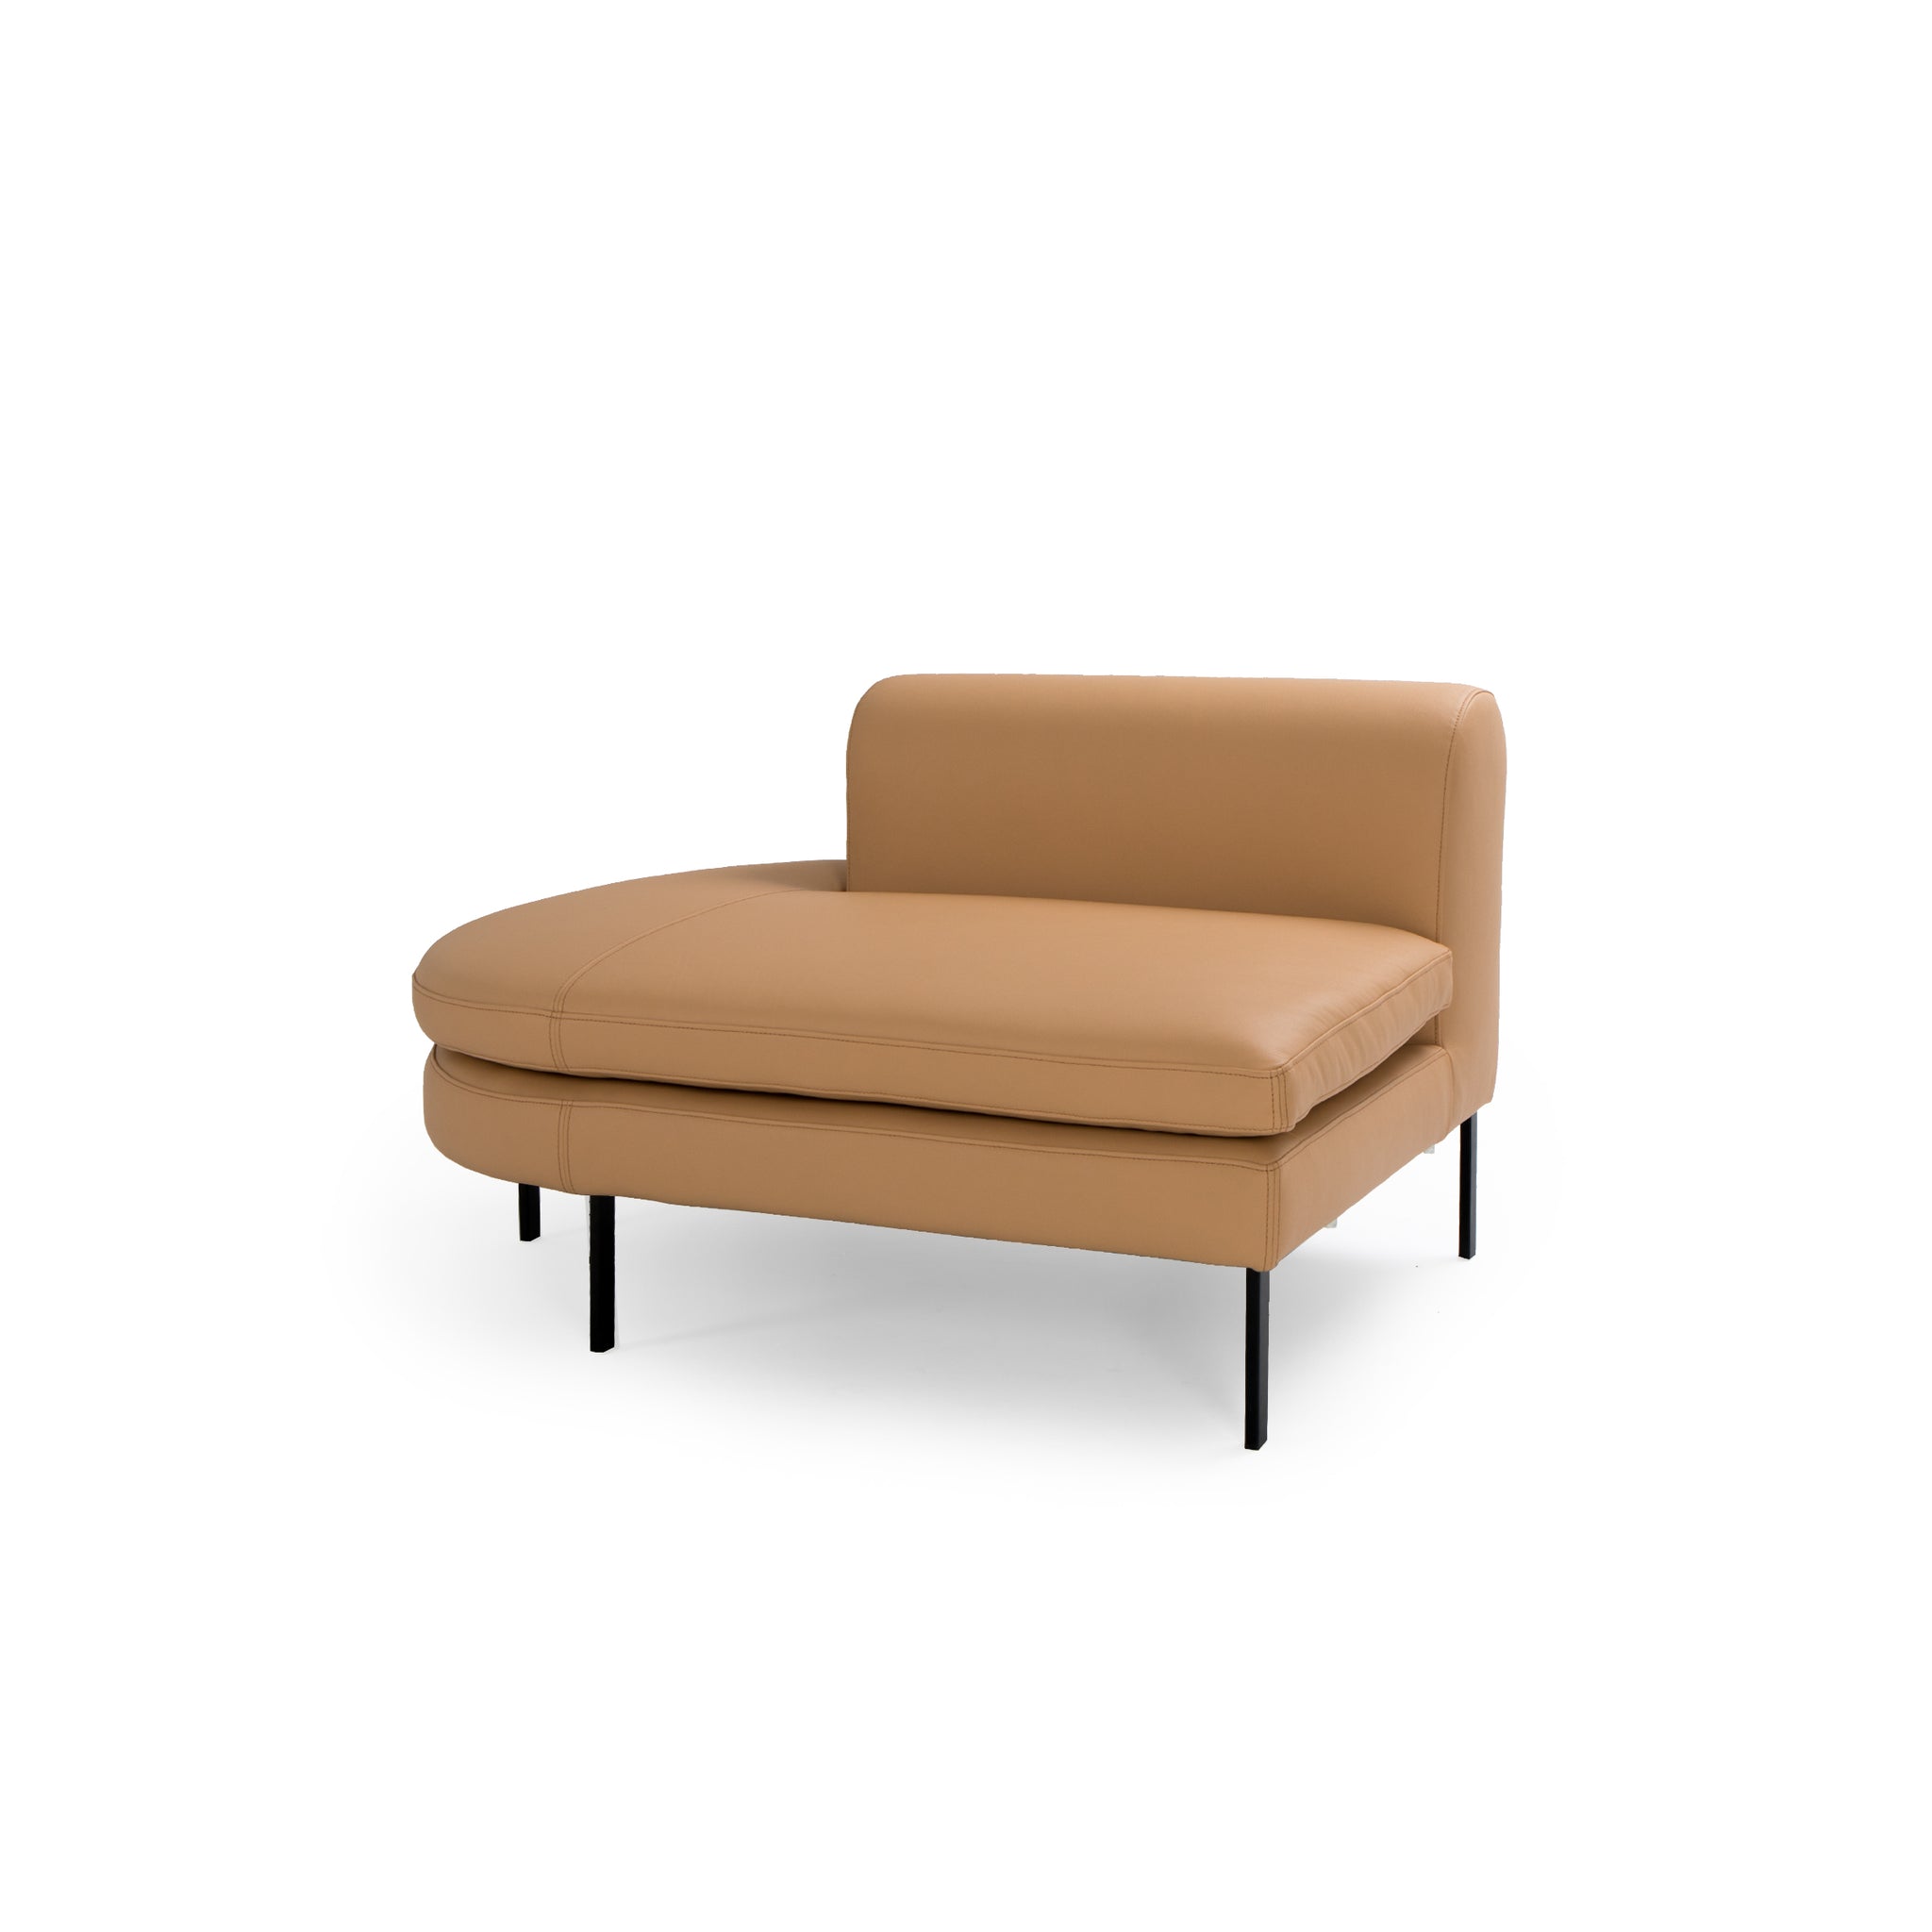 Archie 50" Leather Left Chaise